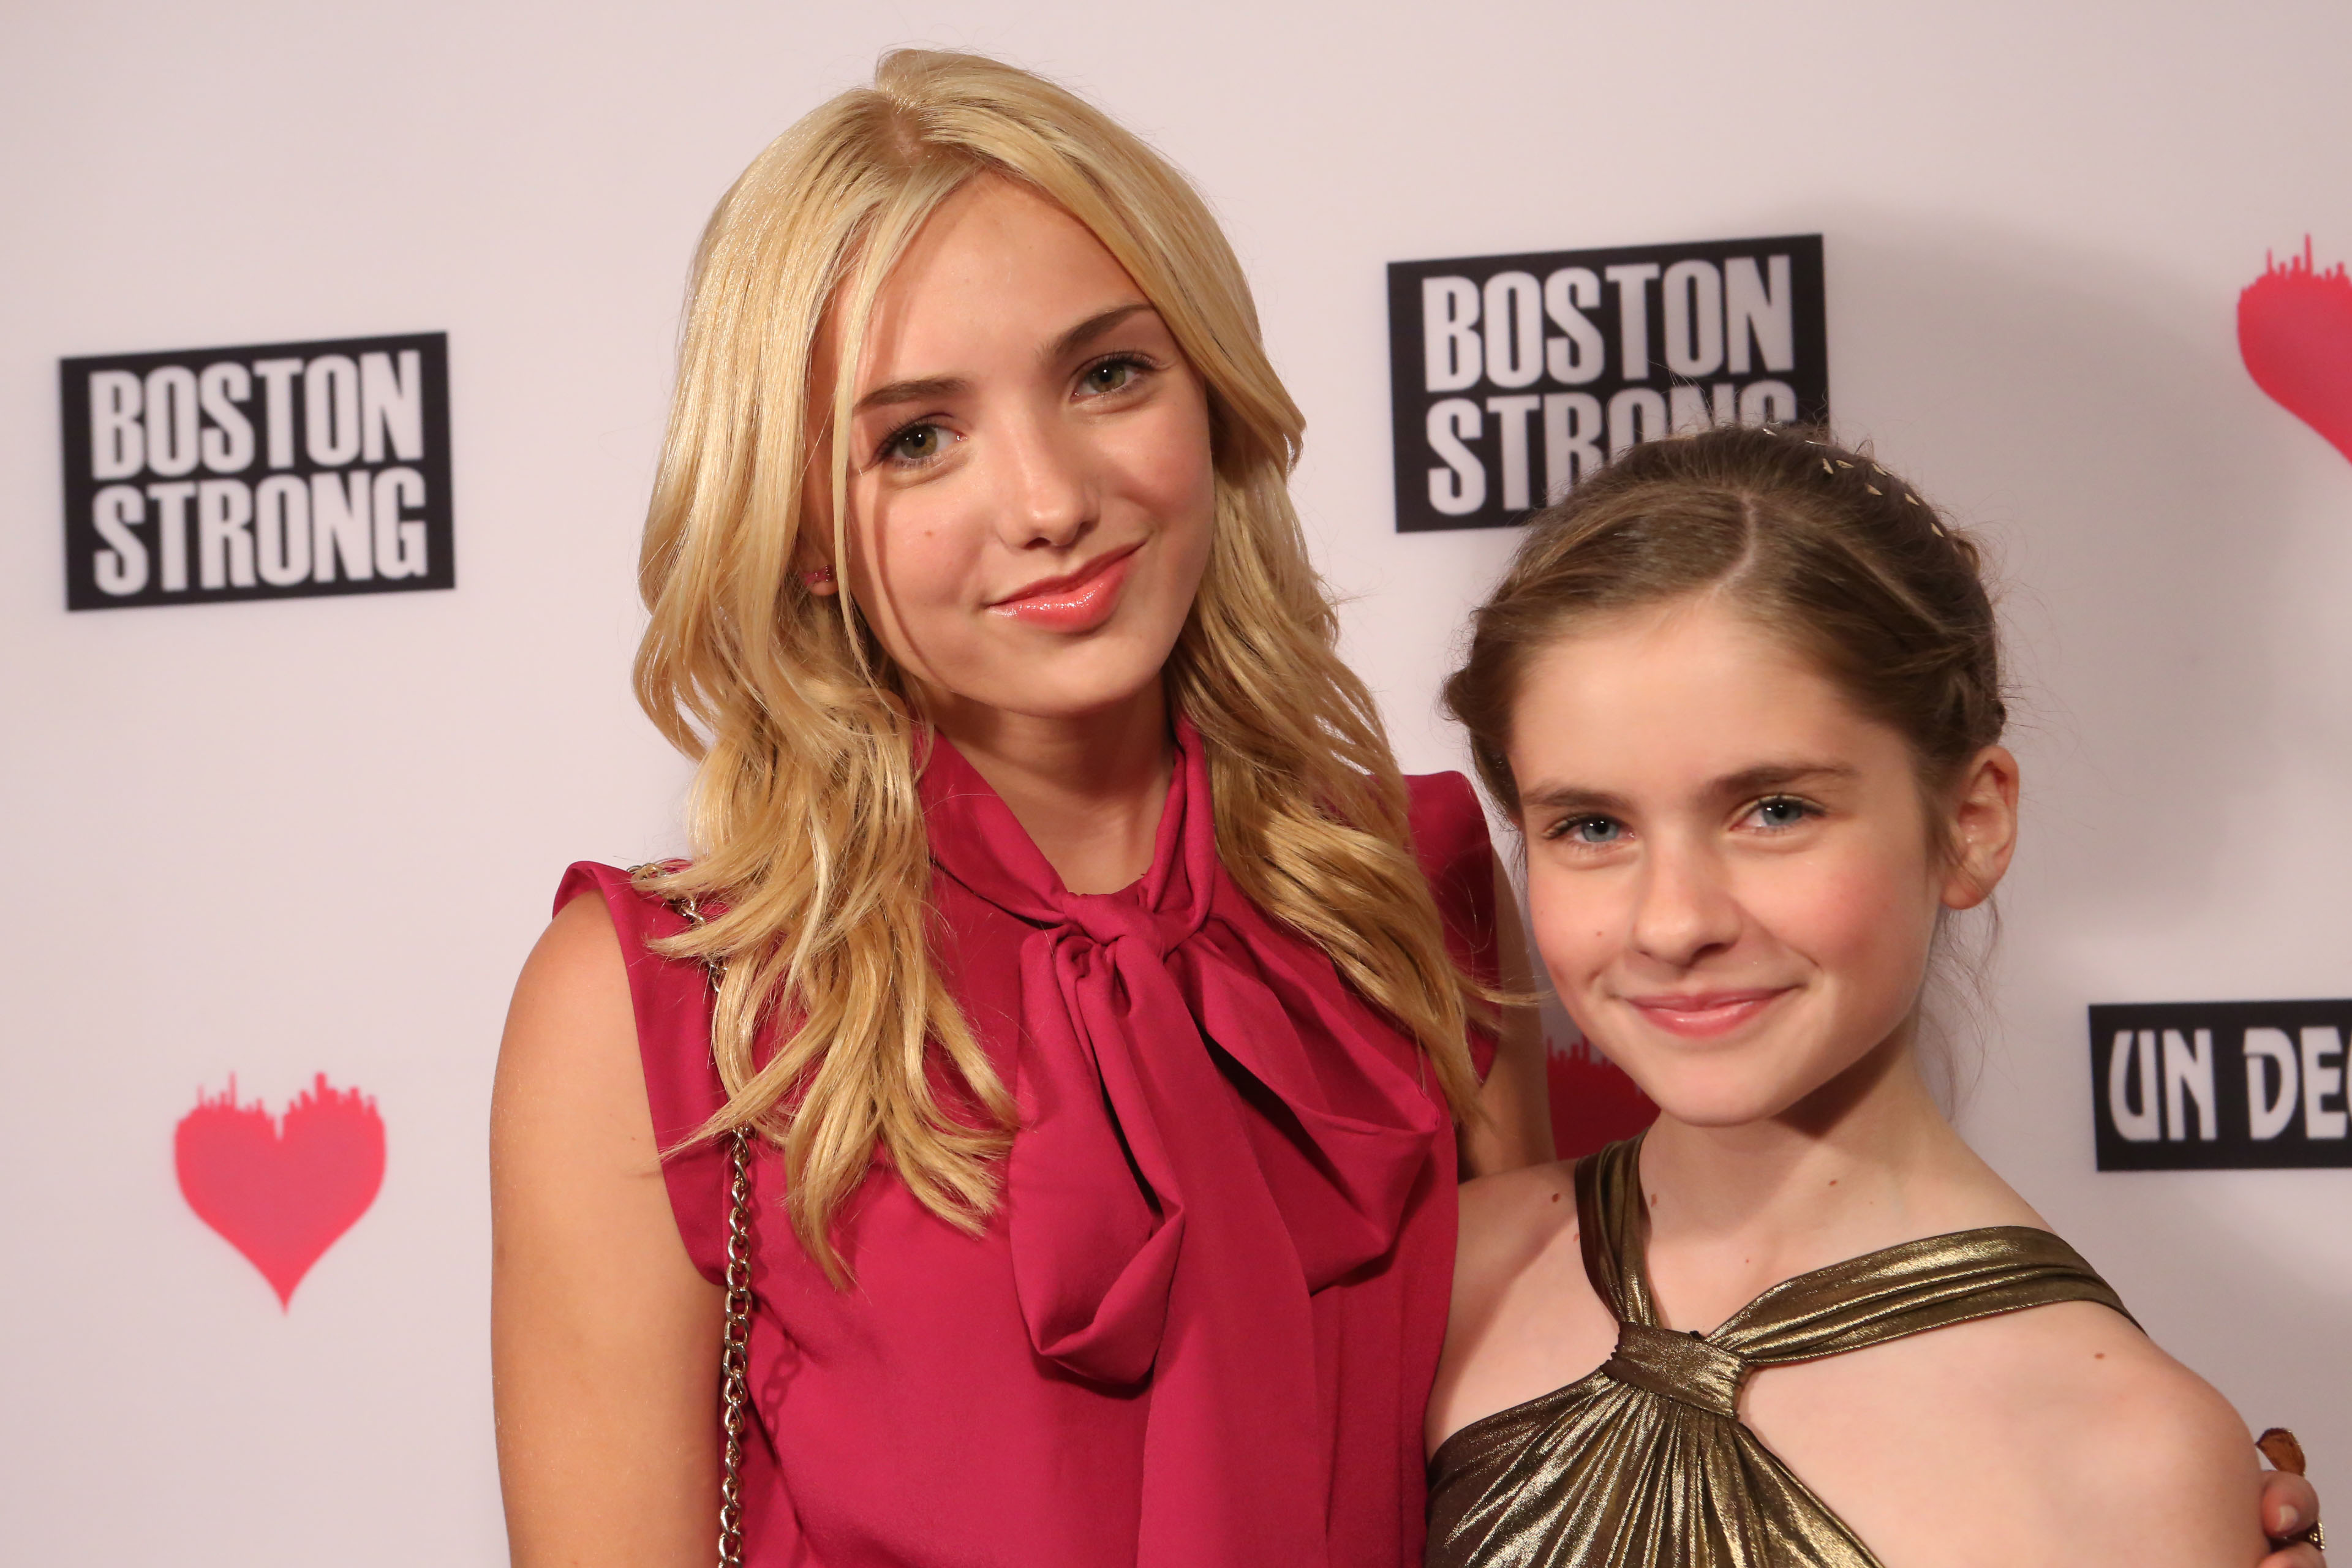 Peyton List and Taylor Ann Thompson - Un Deux Trois - Boston Charity Event - May 15, 2013